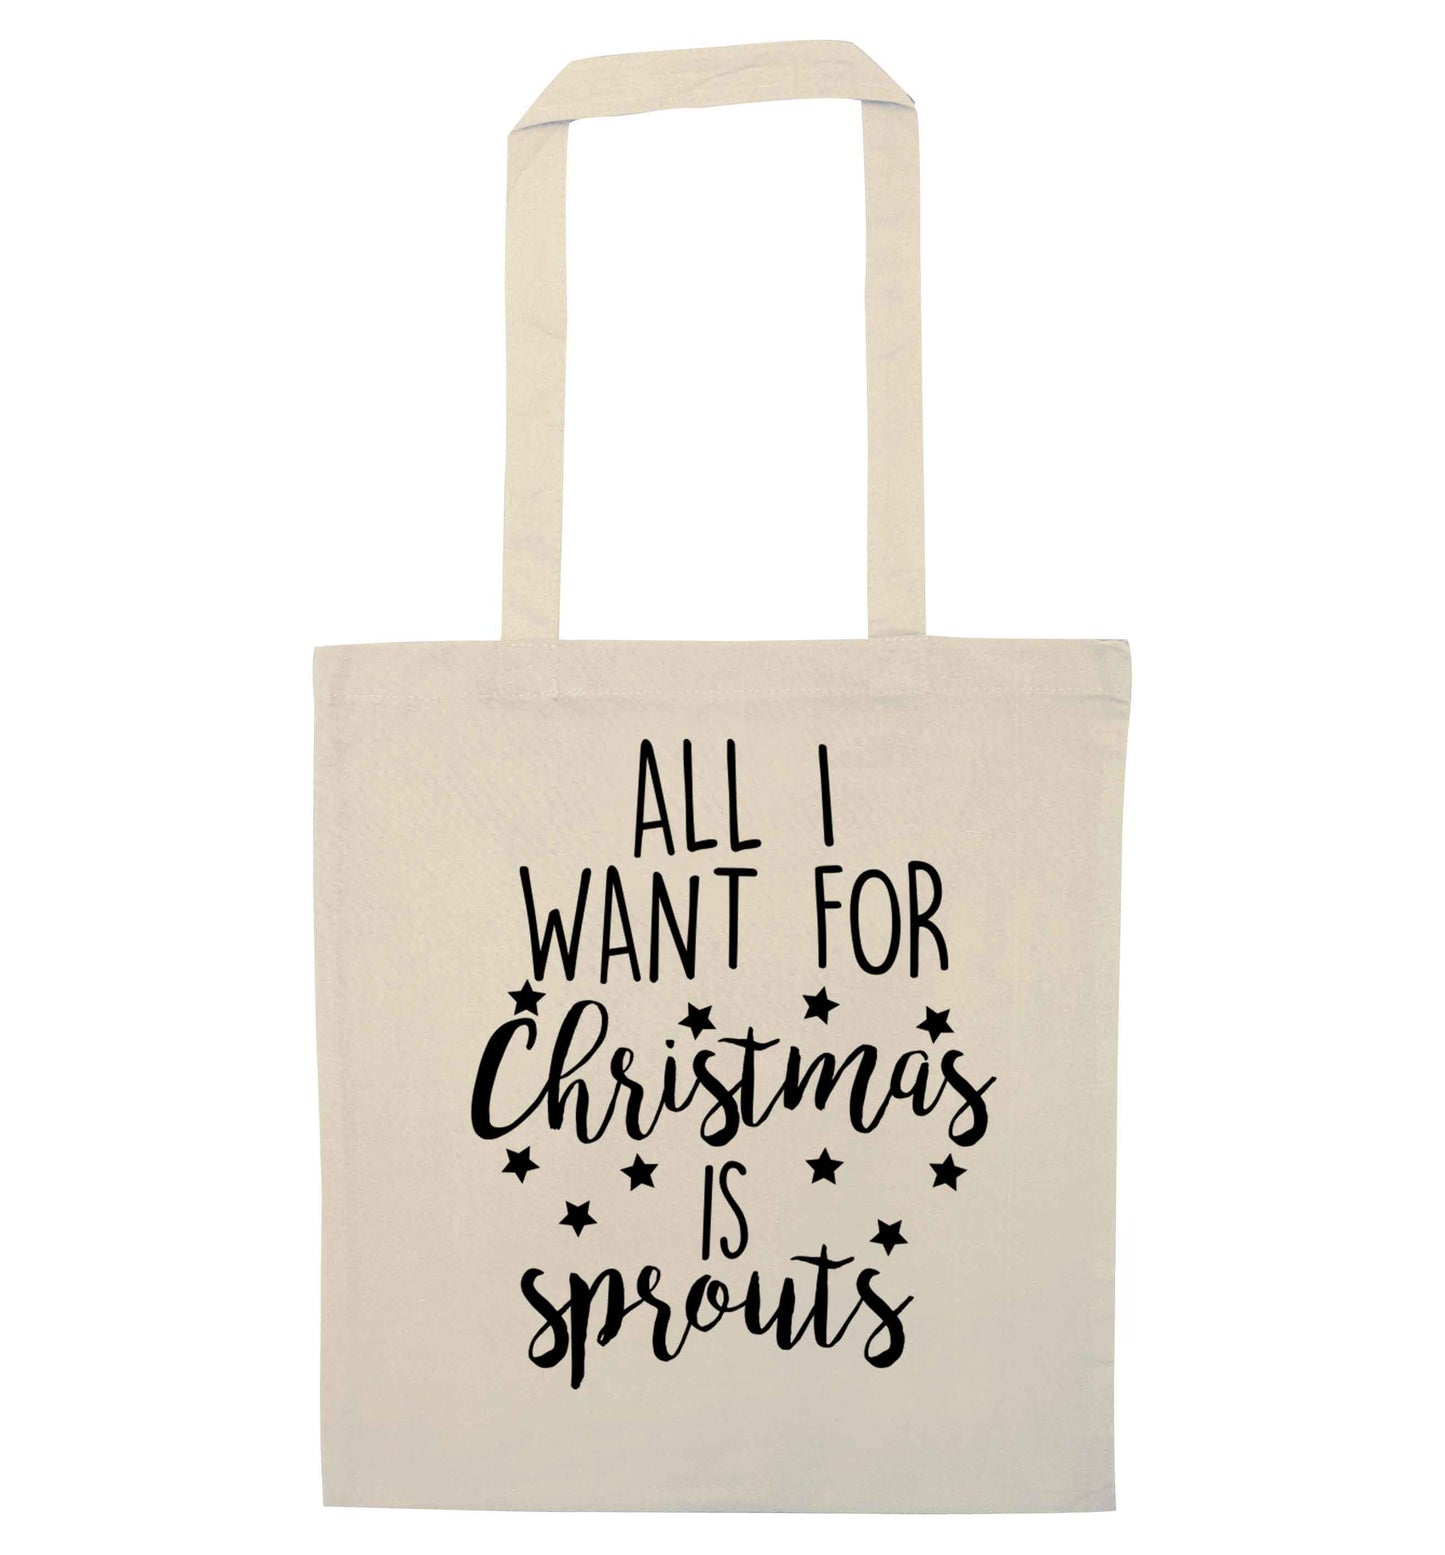 All I want for Christmas is sprouts natural tote bag